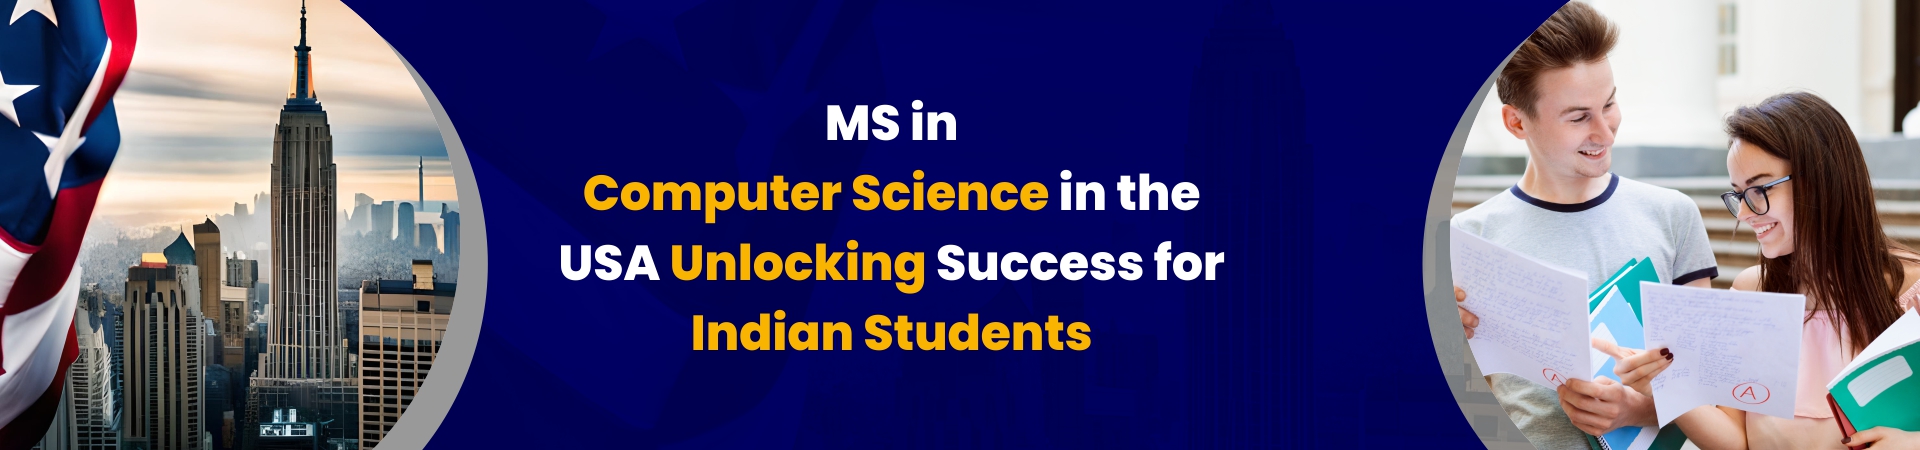 MS in Computer Science in the USA: Unlocking Success for Indian Students